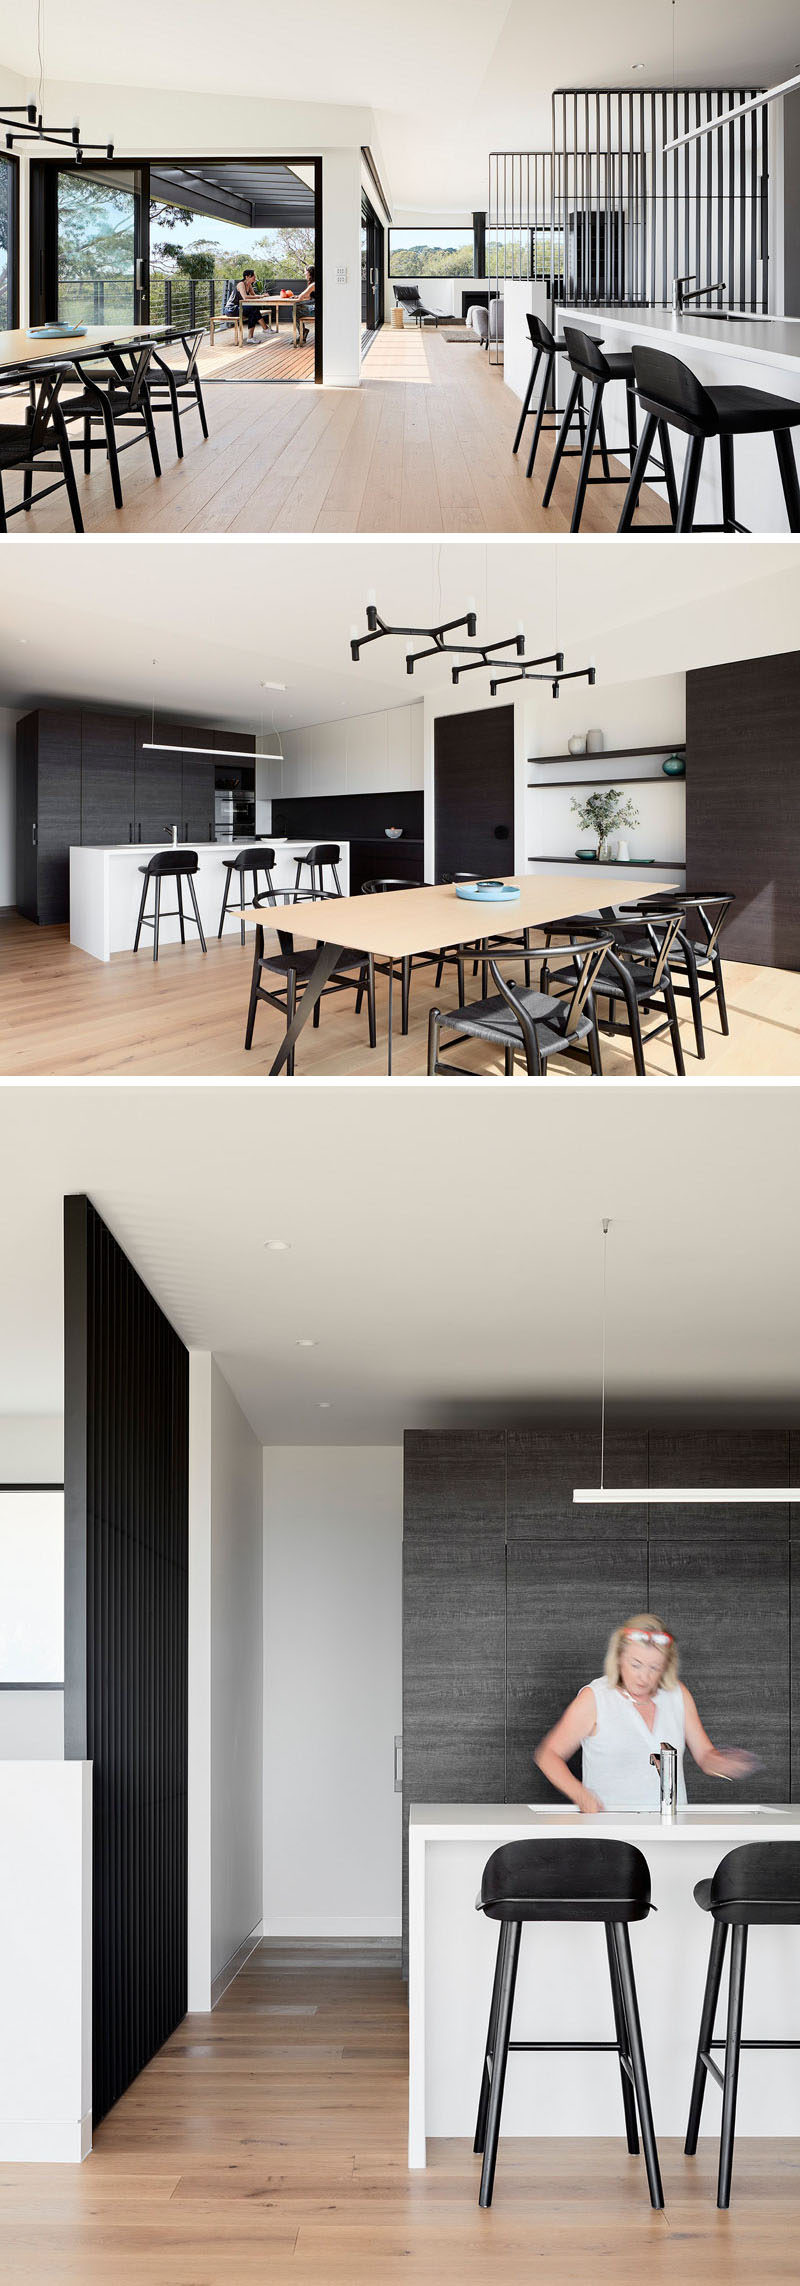 Beside the living area in this home is the indoor dining area and kitchen. In the dining room, the black chandelier matches the black chairs, while in the kitchen, a bright white kitchen island is a strong contrast against the dark wood cabinetry.